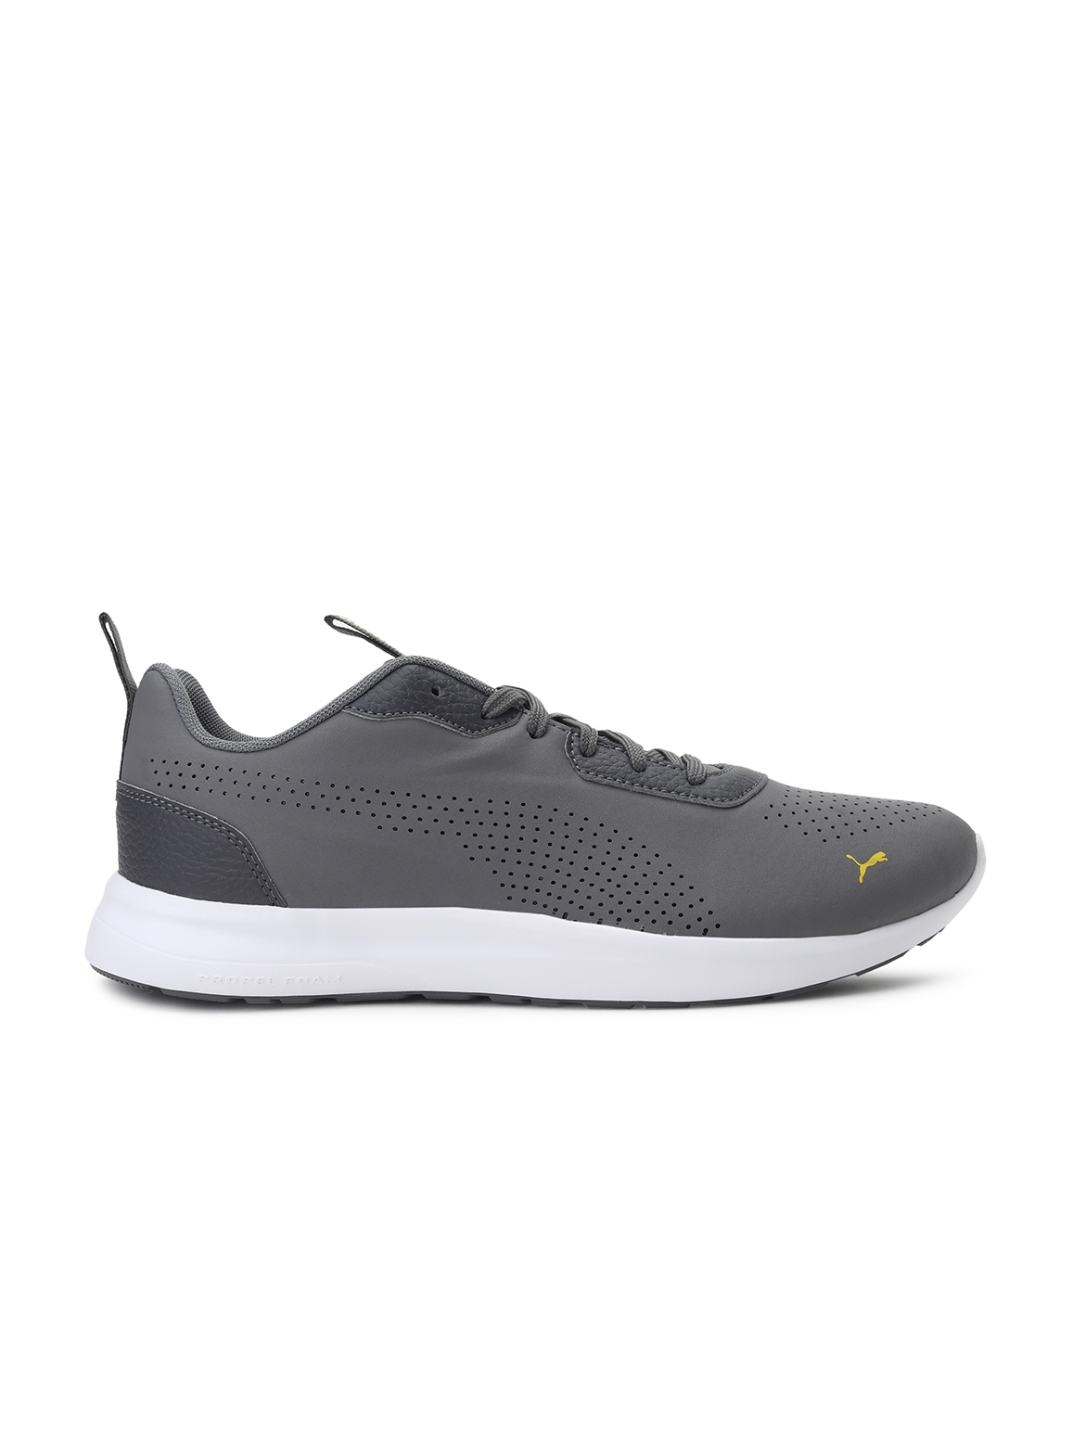 Puma | Perforated Low Unisex Sneakers 2